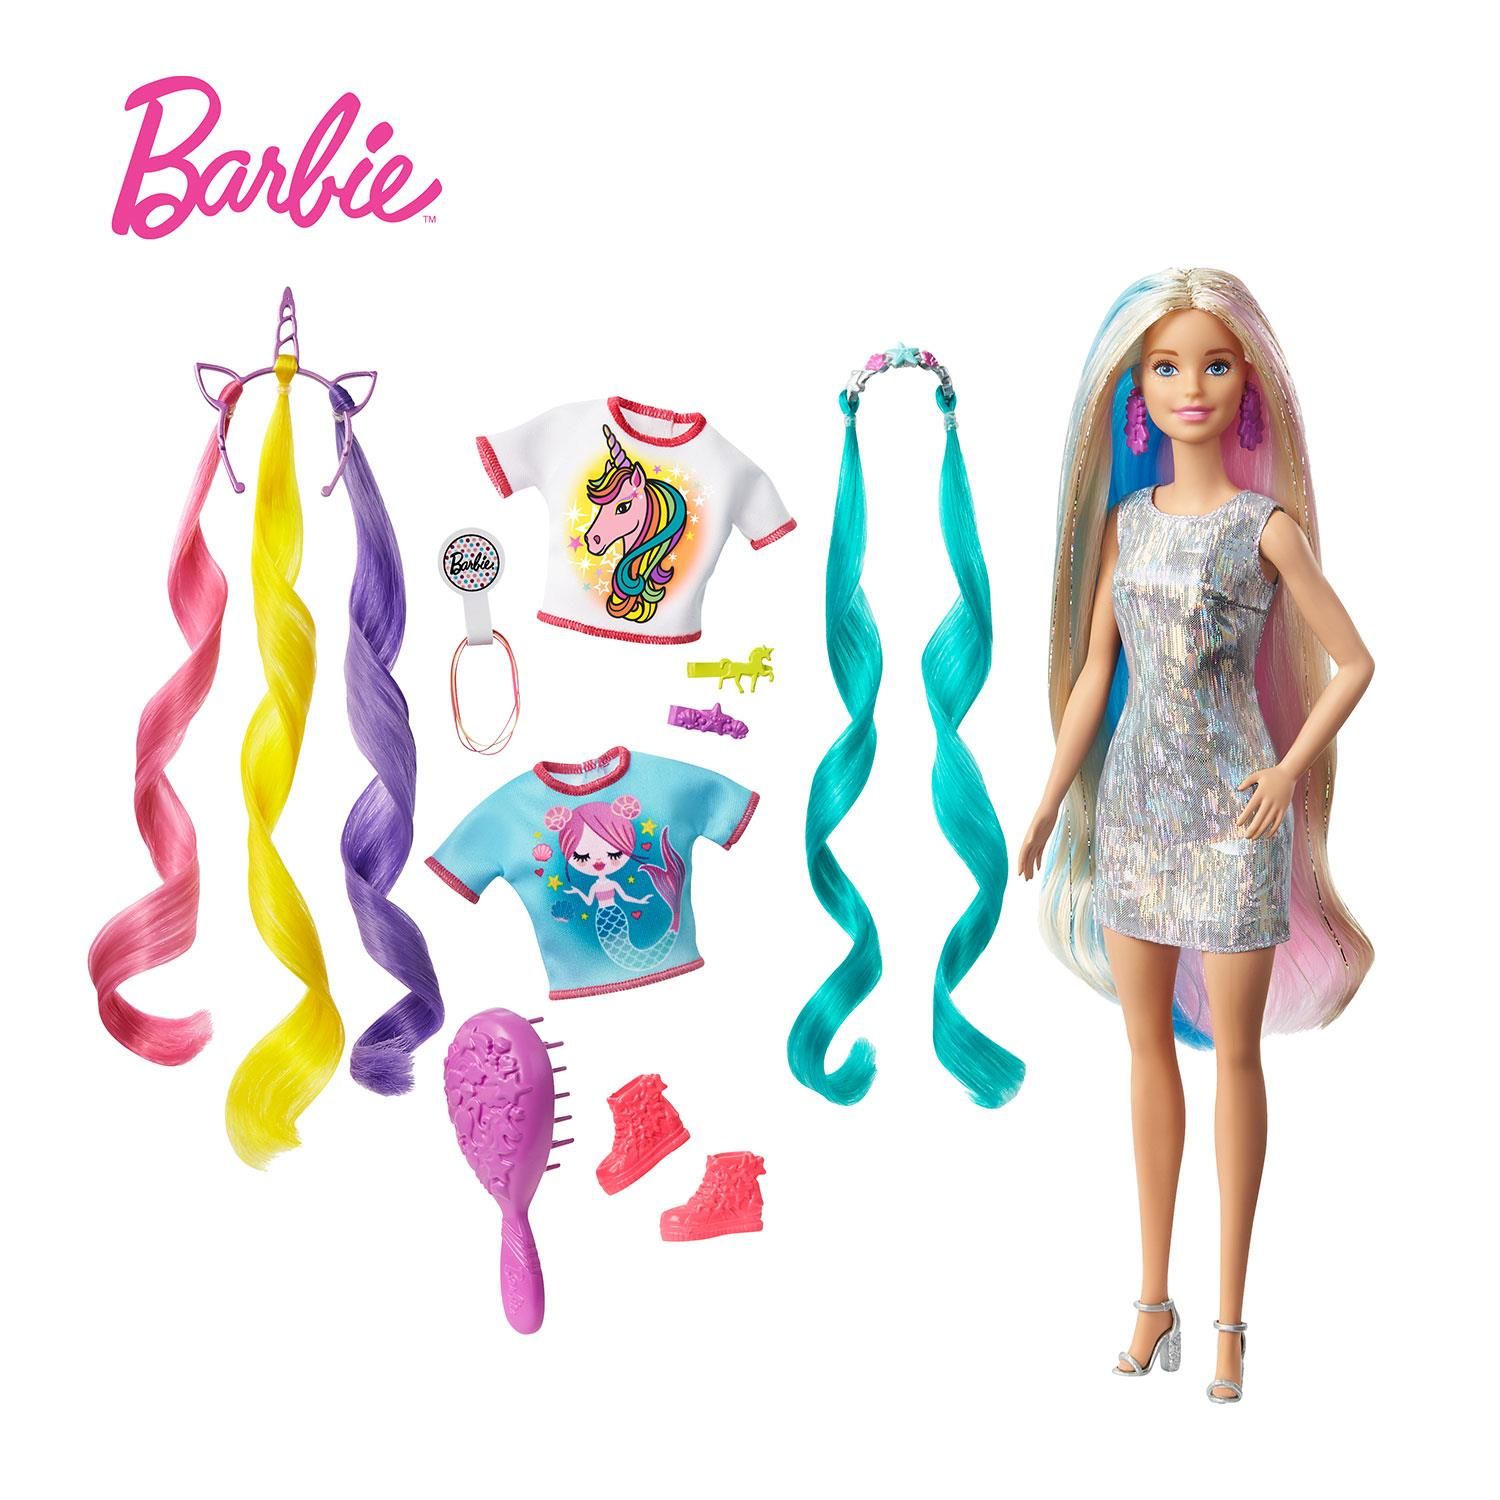 Barbie Fantasy Hair Doll with Mermaid and Unicorn Accessories

Create a magical unicorn or mermaid Barbie with the Barbie Fantasy Hair doll. This Barbie doll comes with two beautiful fantasy looks, with crowns, colourful extensions and themed tops to transform Barbie(C) into a unicorn or mermaid. Barbie’s blonde hair will glow with other bright colours, and kids can use the hairbands, clips and hairbrush included to create a Barbie Fantasy Hair doll of their own. Kids aged 3+ will love dressing up Barbie and making her shine! Doll cannot stand alone. Colours and styles may vary.

Features:

Barbie Fantasy Hair Doll comes with two different fantastical looks and accessories – to make either a unicorn or mermaid Barbie.
Dress the Barbie doll with the mermaid top, and add the mermaid hair crown of seashells, starfishes and elegant long teal extensions to brighten her blonde hair.
Or turn mermaid Barbie into a unicorn with the unicorn rainbow T-shirt, crown and colourful hair extensions in purple, yellow and pink.
Use the hair clips, bands and brush to style Barbie’s long, vibrant and glitter-streaked hair for an even more fantastical look.
Accessorise the Barbie party dress with silver heels or pink trainers, and purple drop earrings.

Specifications:

Type: Doll Set
Colour: Multicolour
Age Range: 3 to 7 Years
Material: Abs Plastic

Package Includes: Barbie Fantasy Hair Doll with Mermaid and Unicorn Accessories